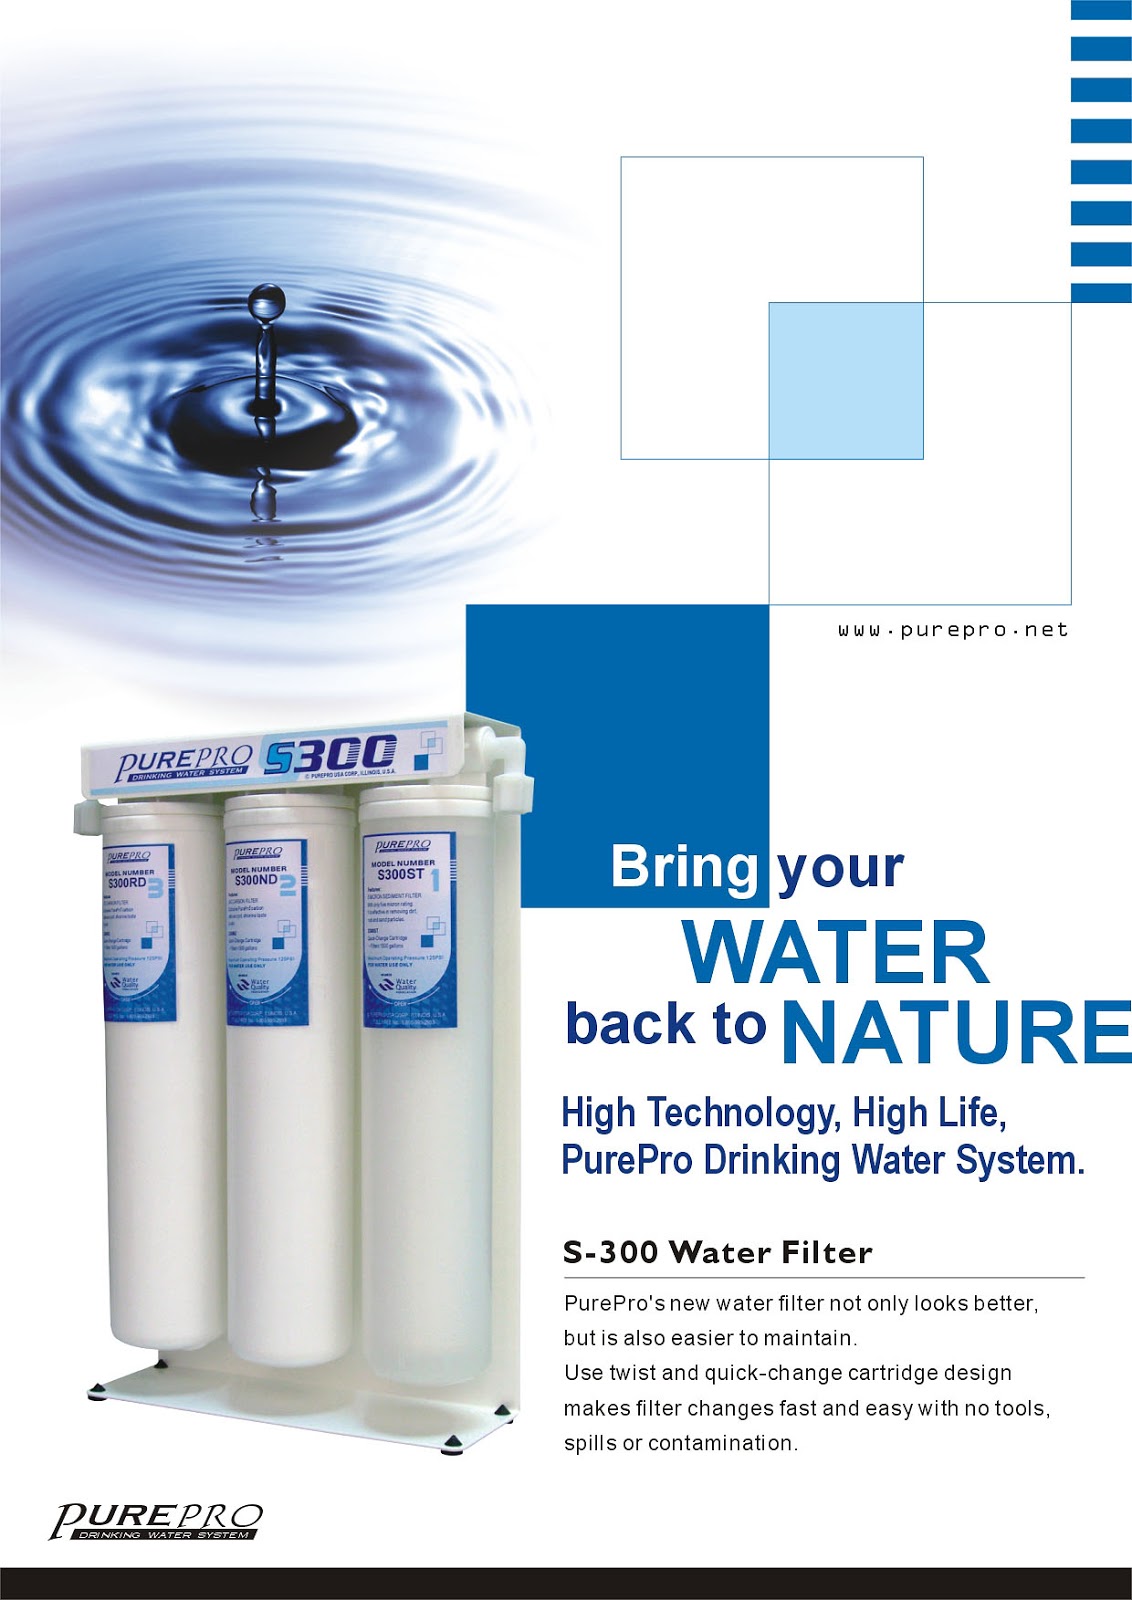 PurePro® S300 Reverse Osmosis (RO) Water Filtration System